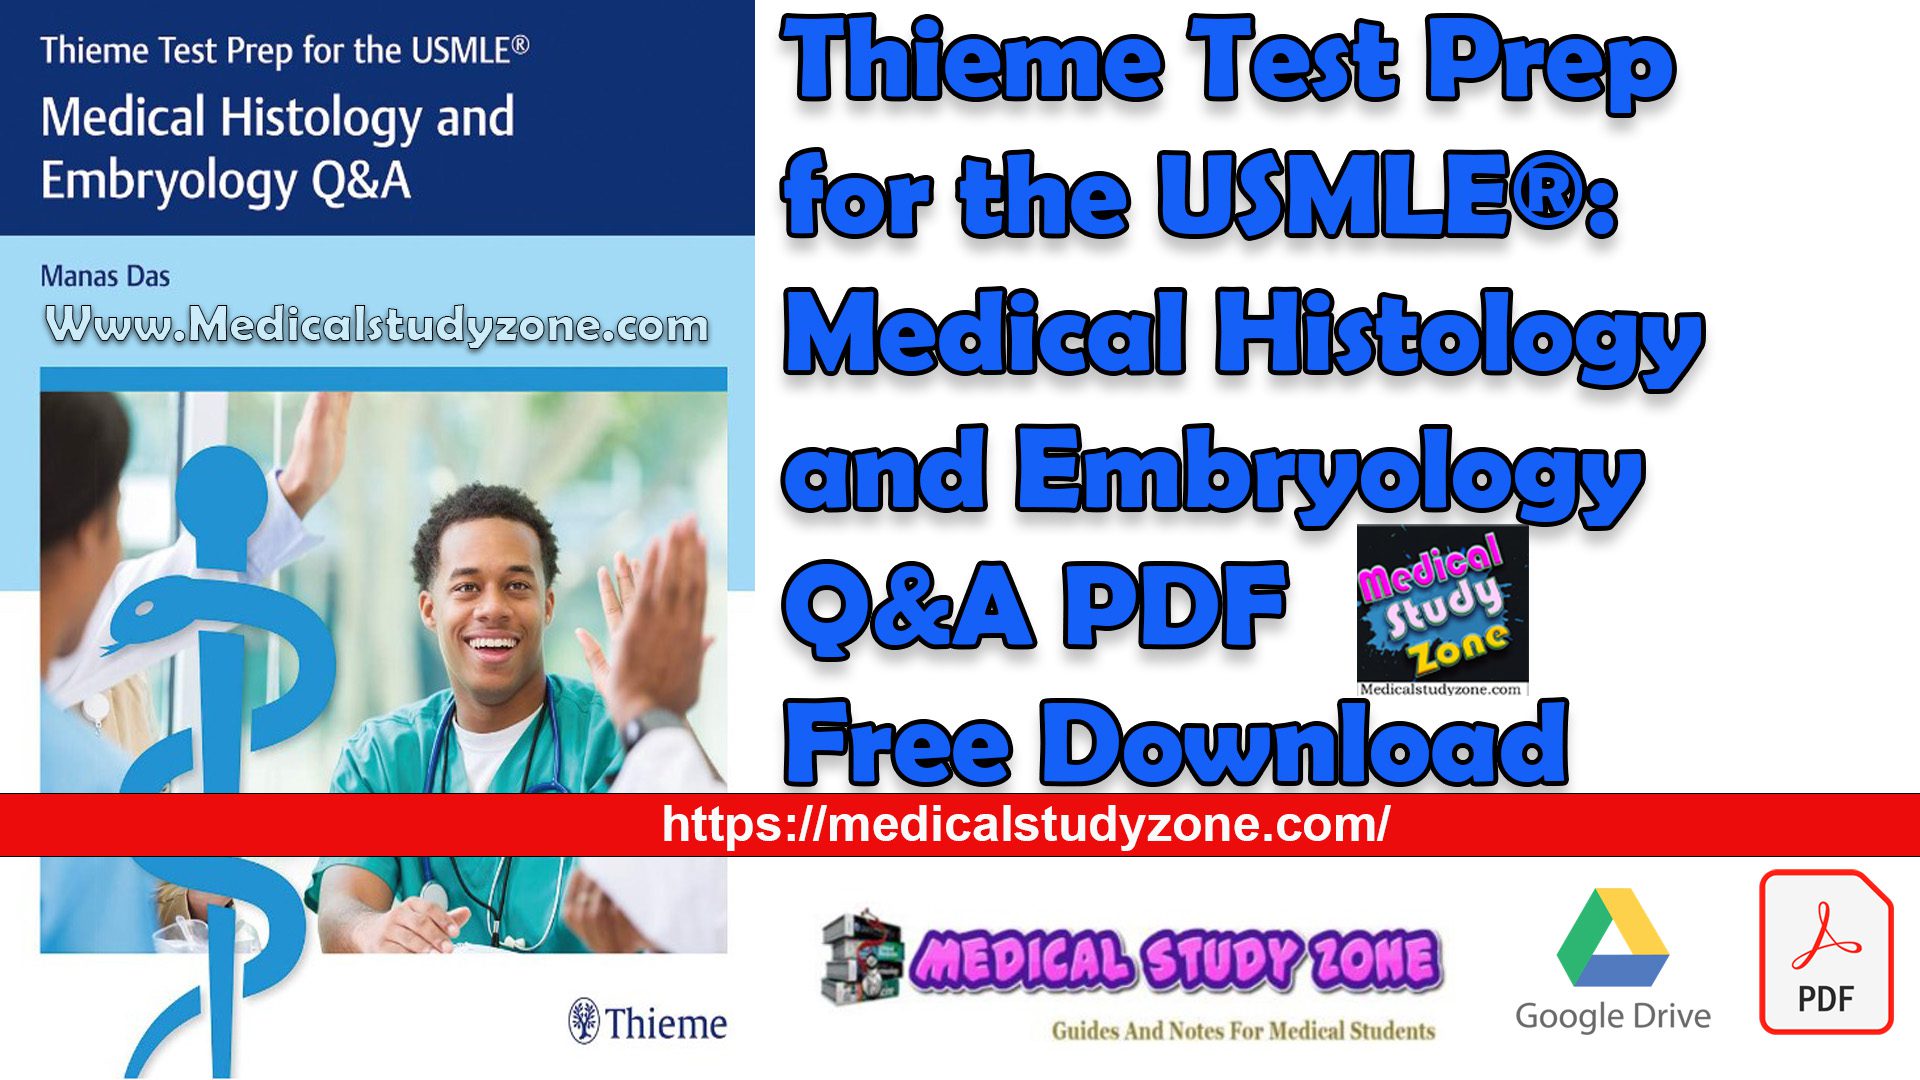 Thieme Test Prep for the USMLE®: Medical Histology and Embryology Q&A PDF Free Download